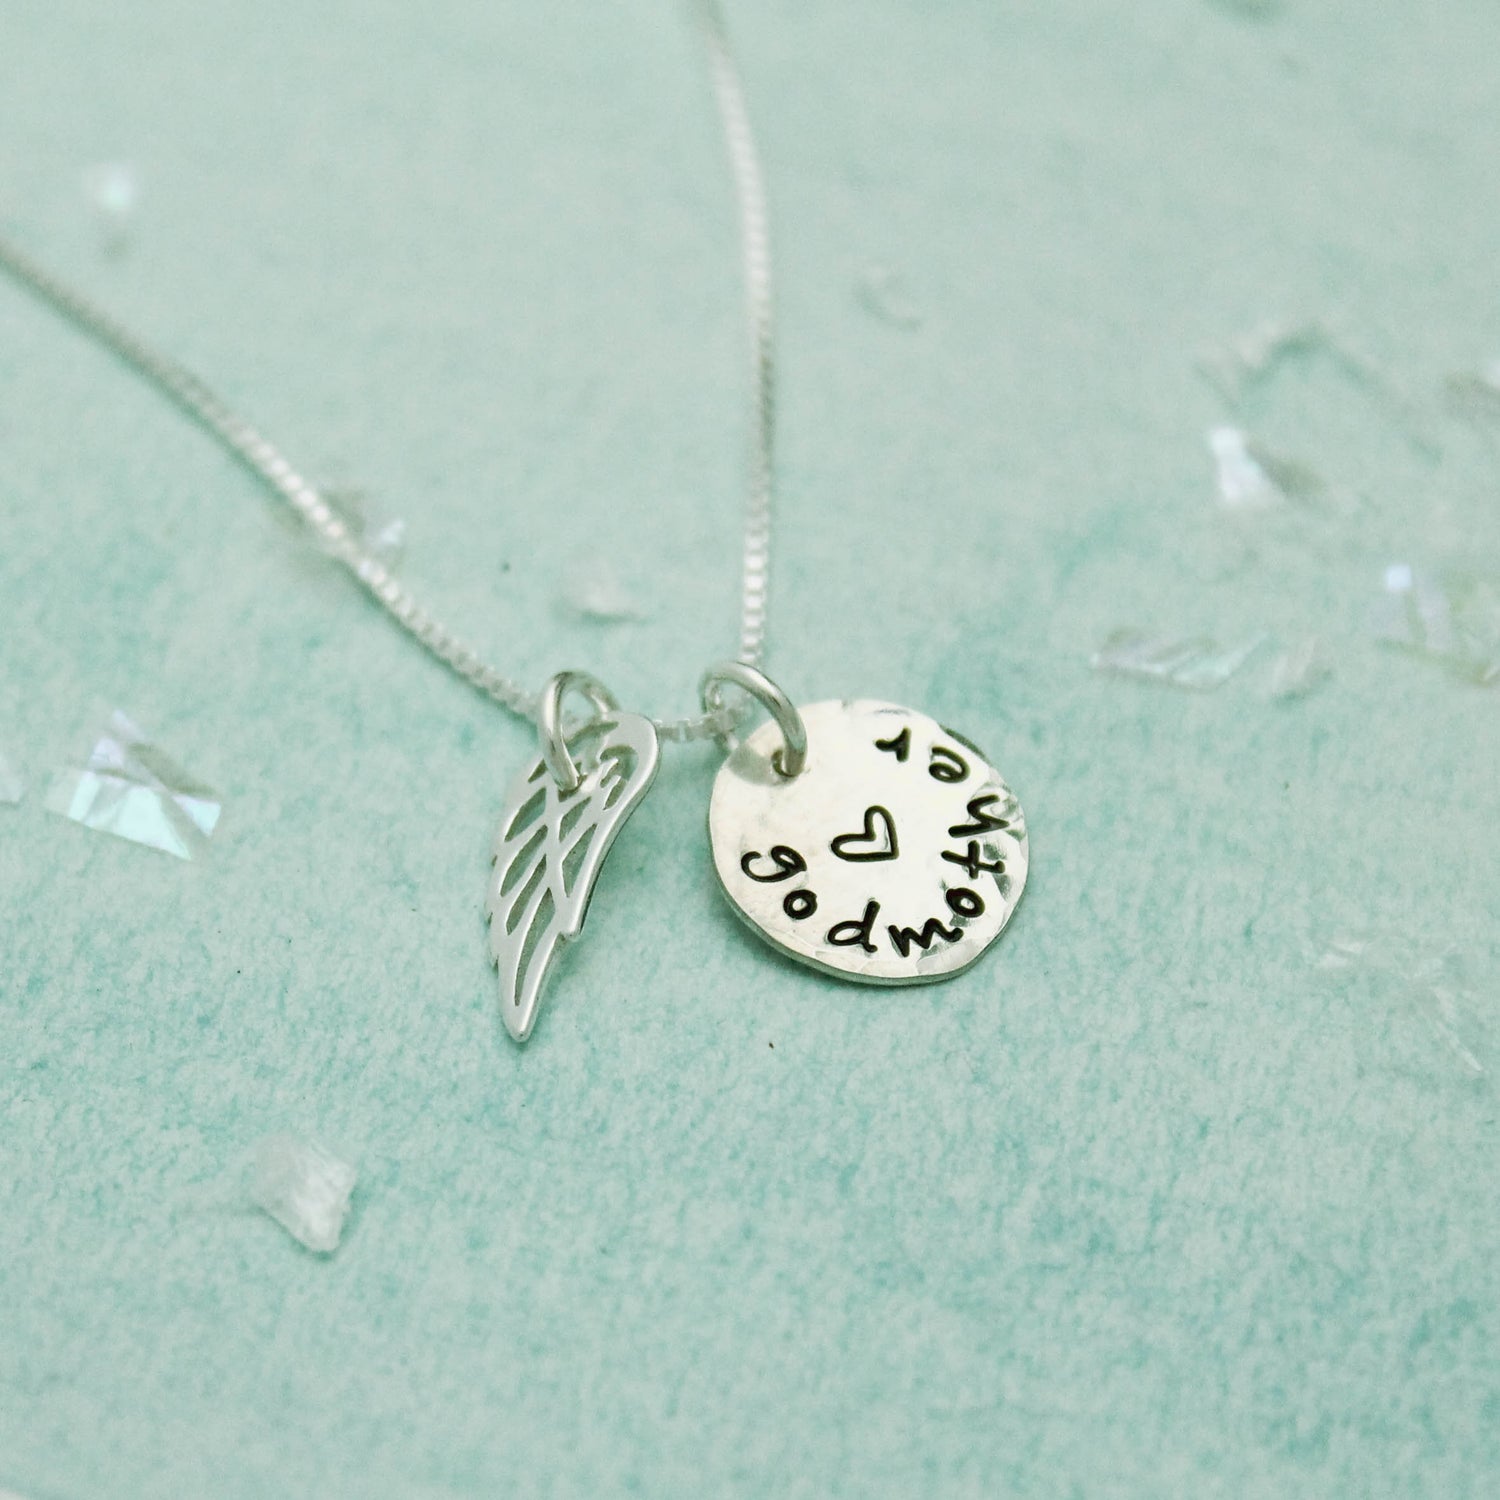 Godmother Necklace - Personalized and Hand Stamped - Cross and Angel Wing in Sterling Silver, Angel Wing Necklace, Unique Godmother Gift